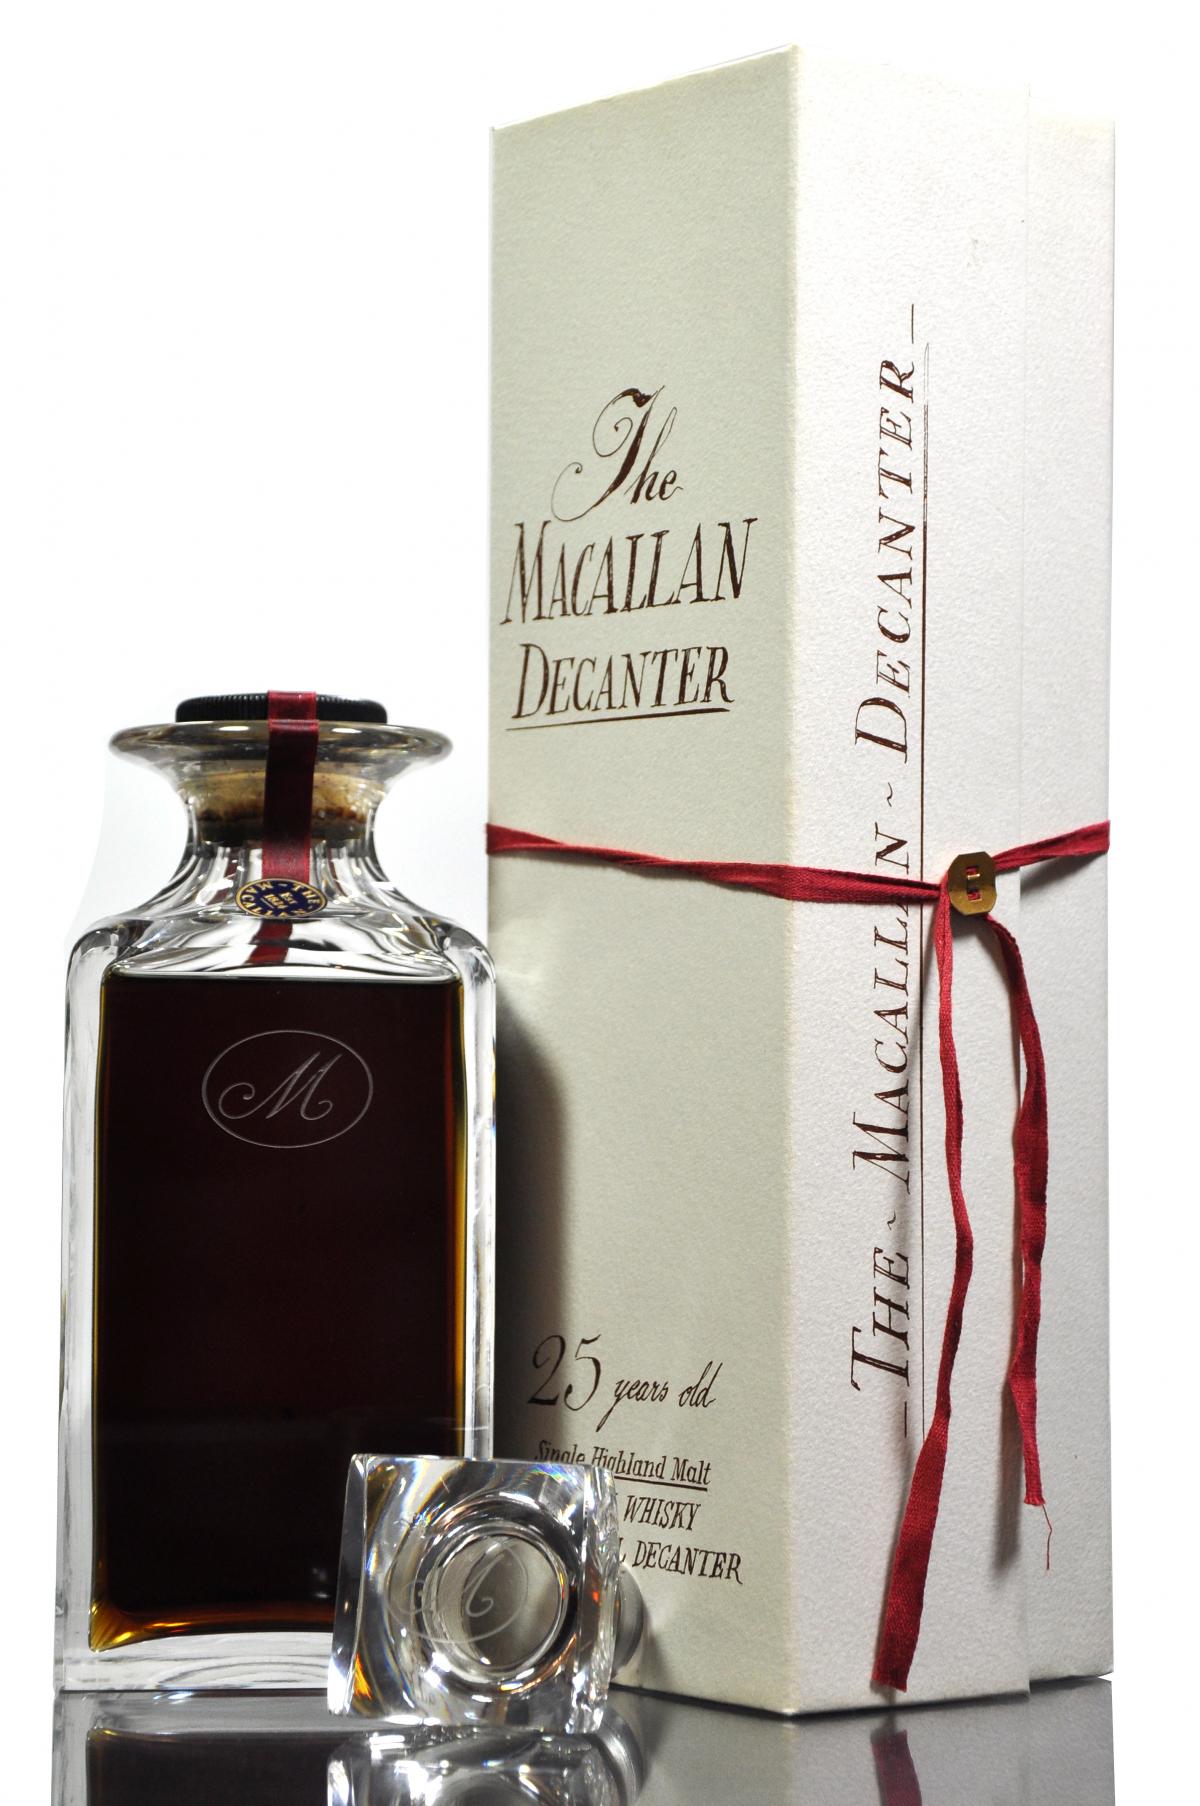 Macallan 25 Year Old - Crystal Decanter